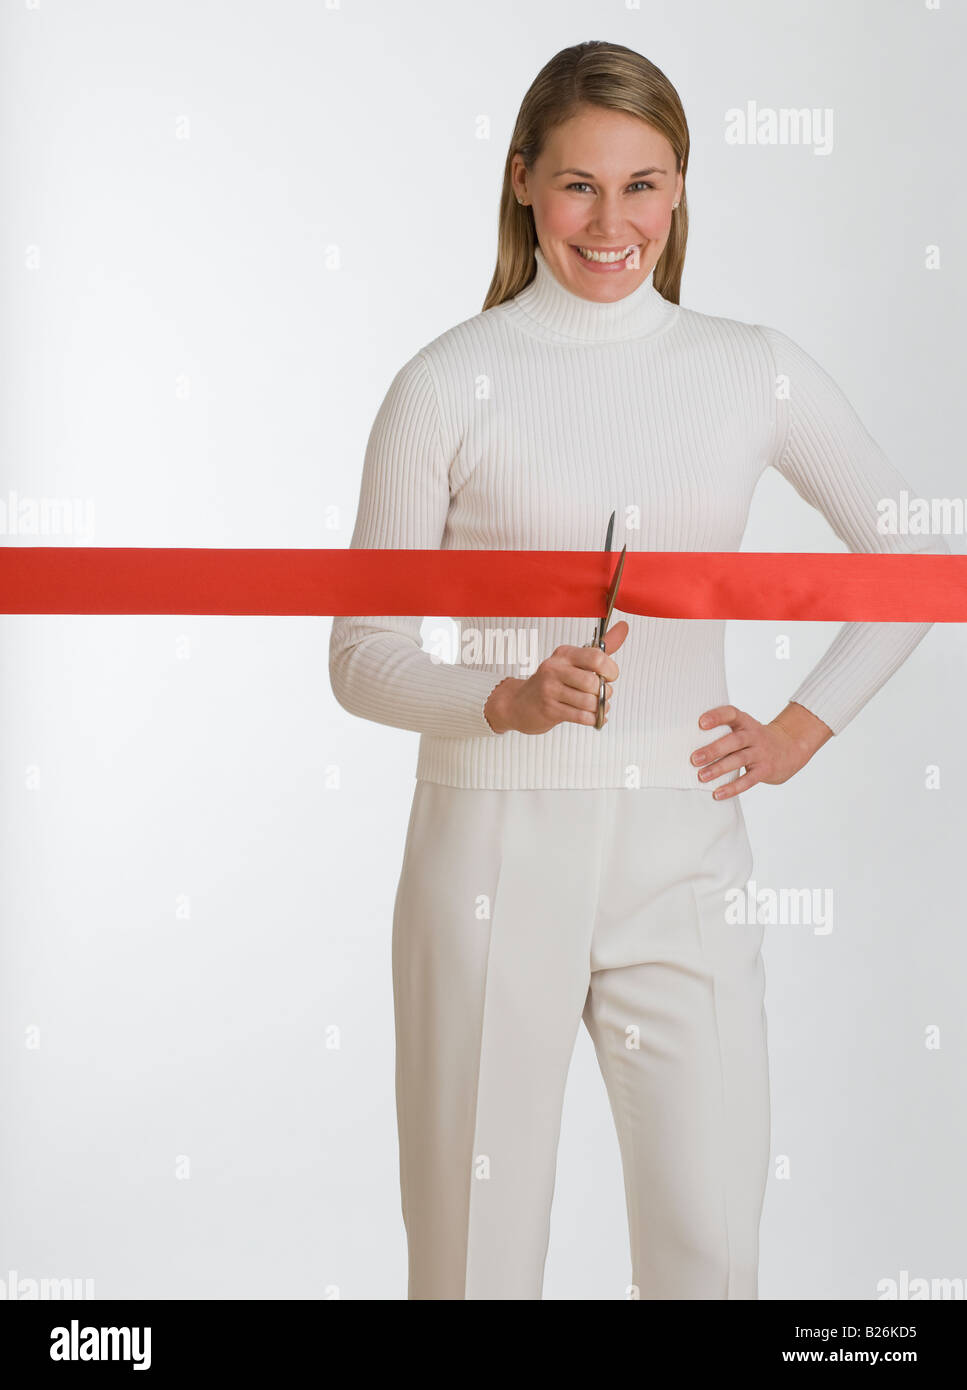 Woman cutting red tape Stock Photo